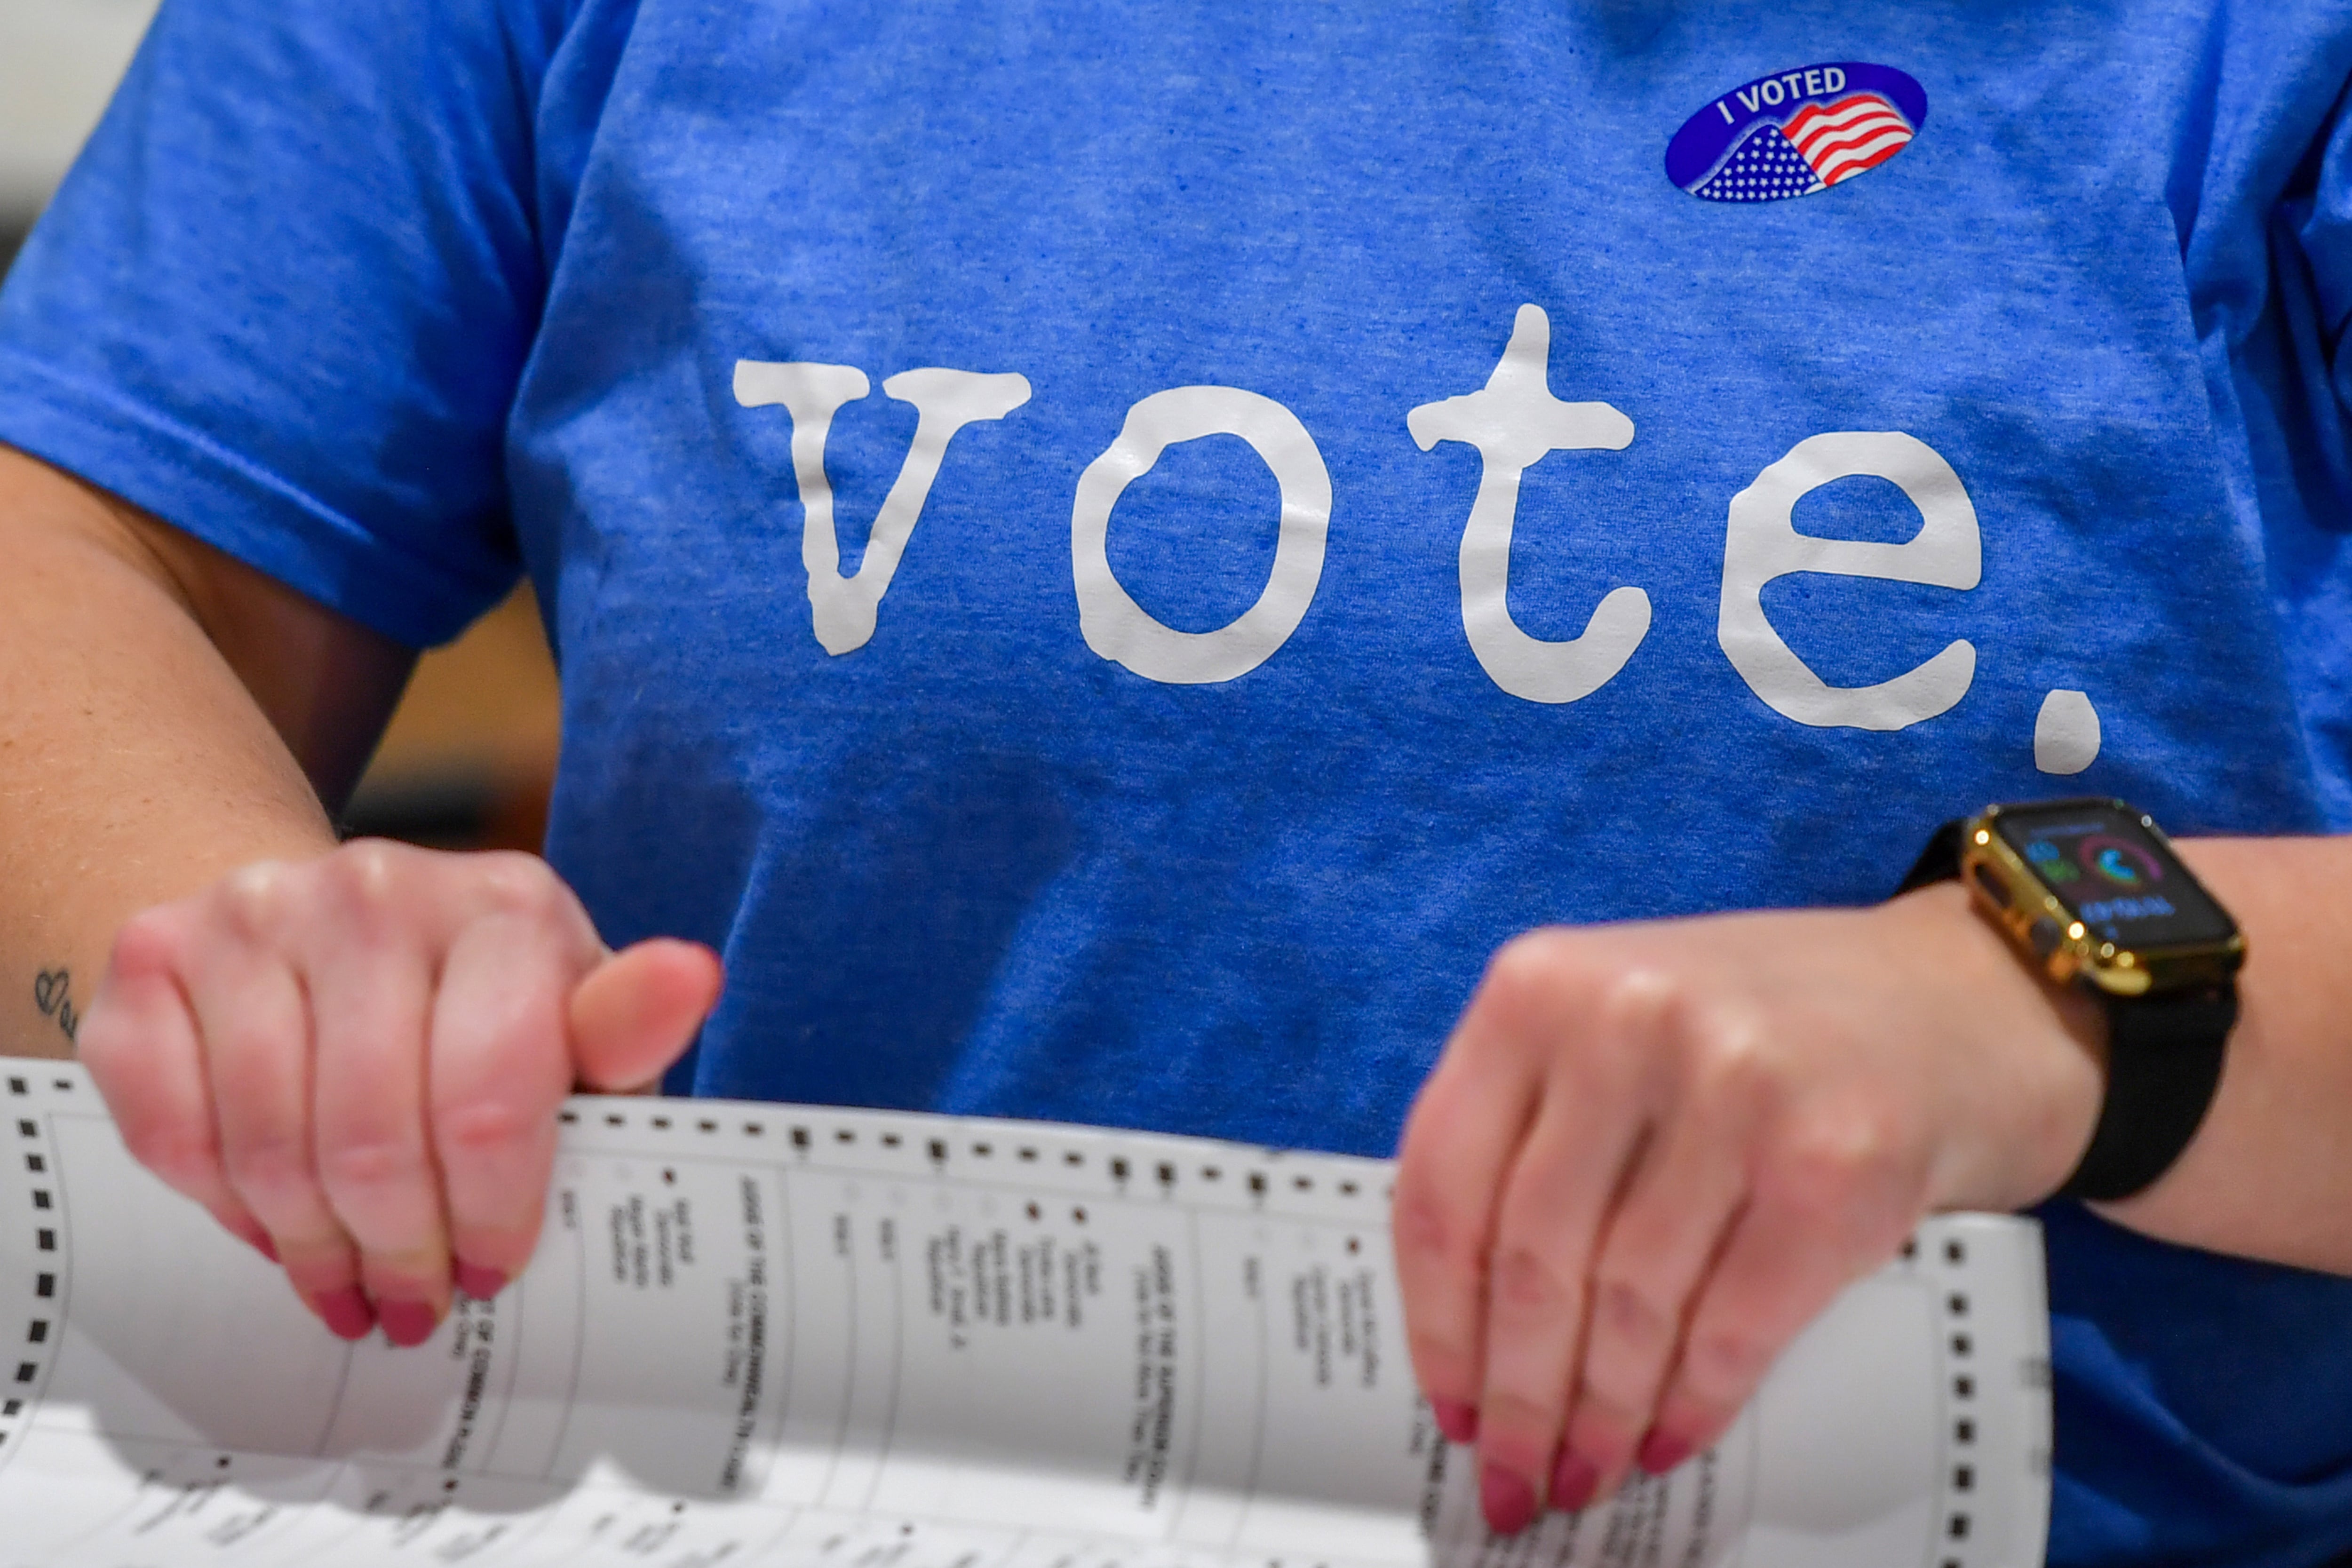 A closeup of a woman wearing a blue shirt that reads "vote" while holding a ballot